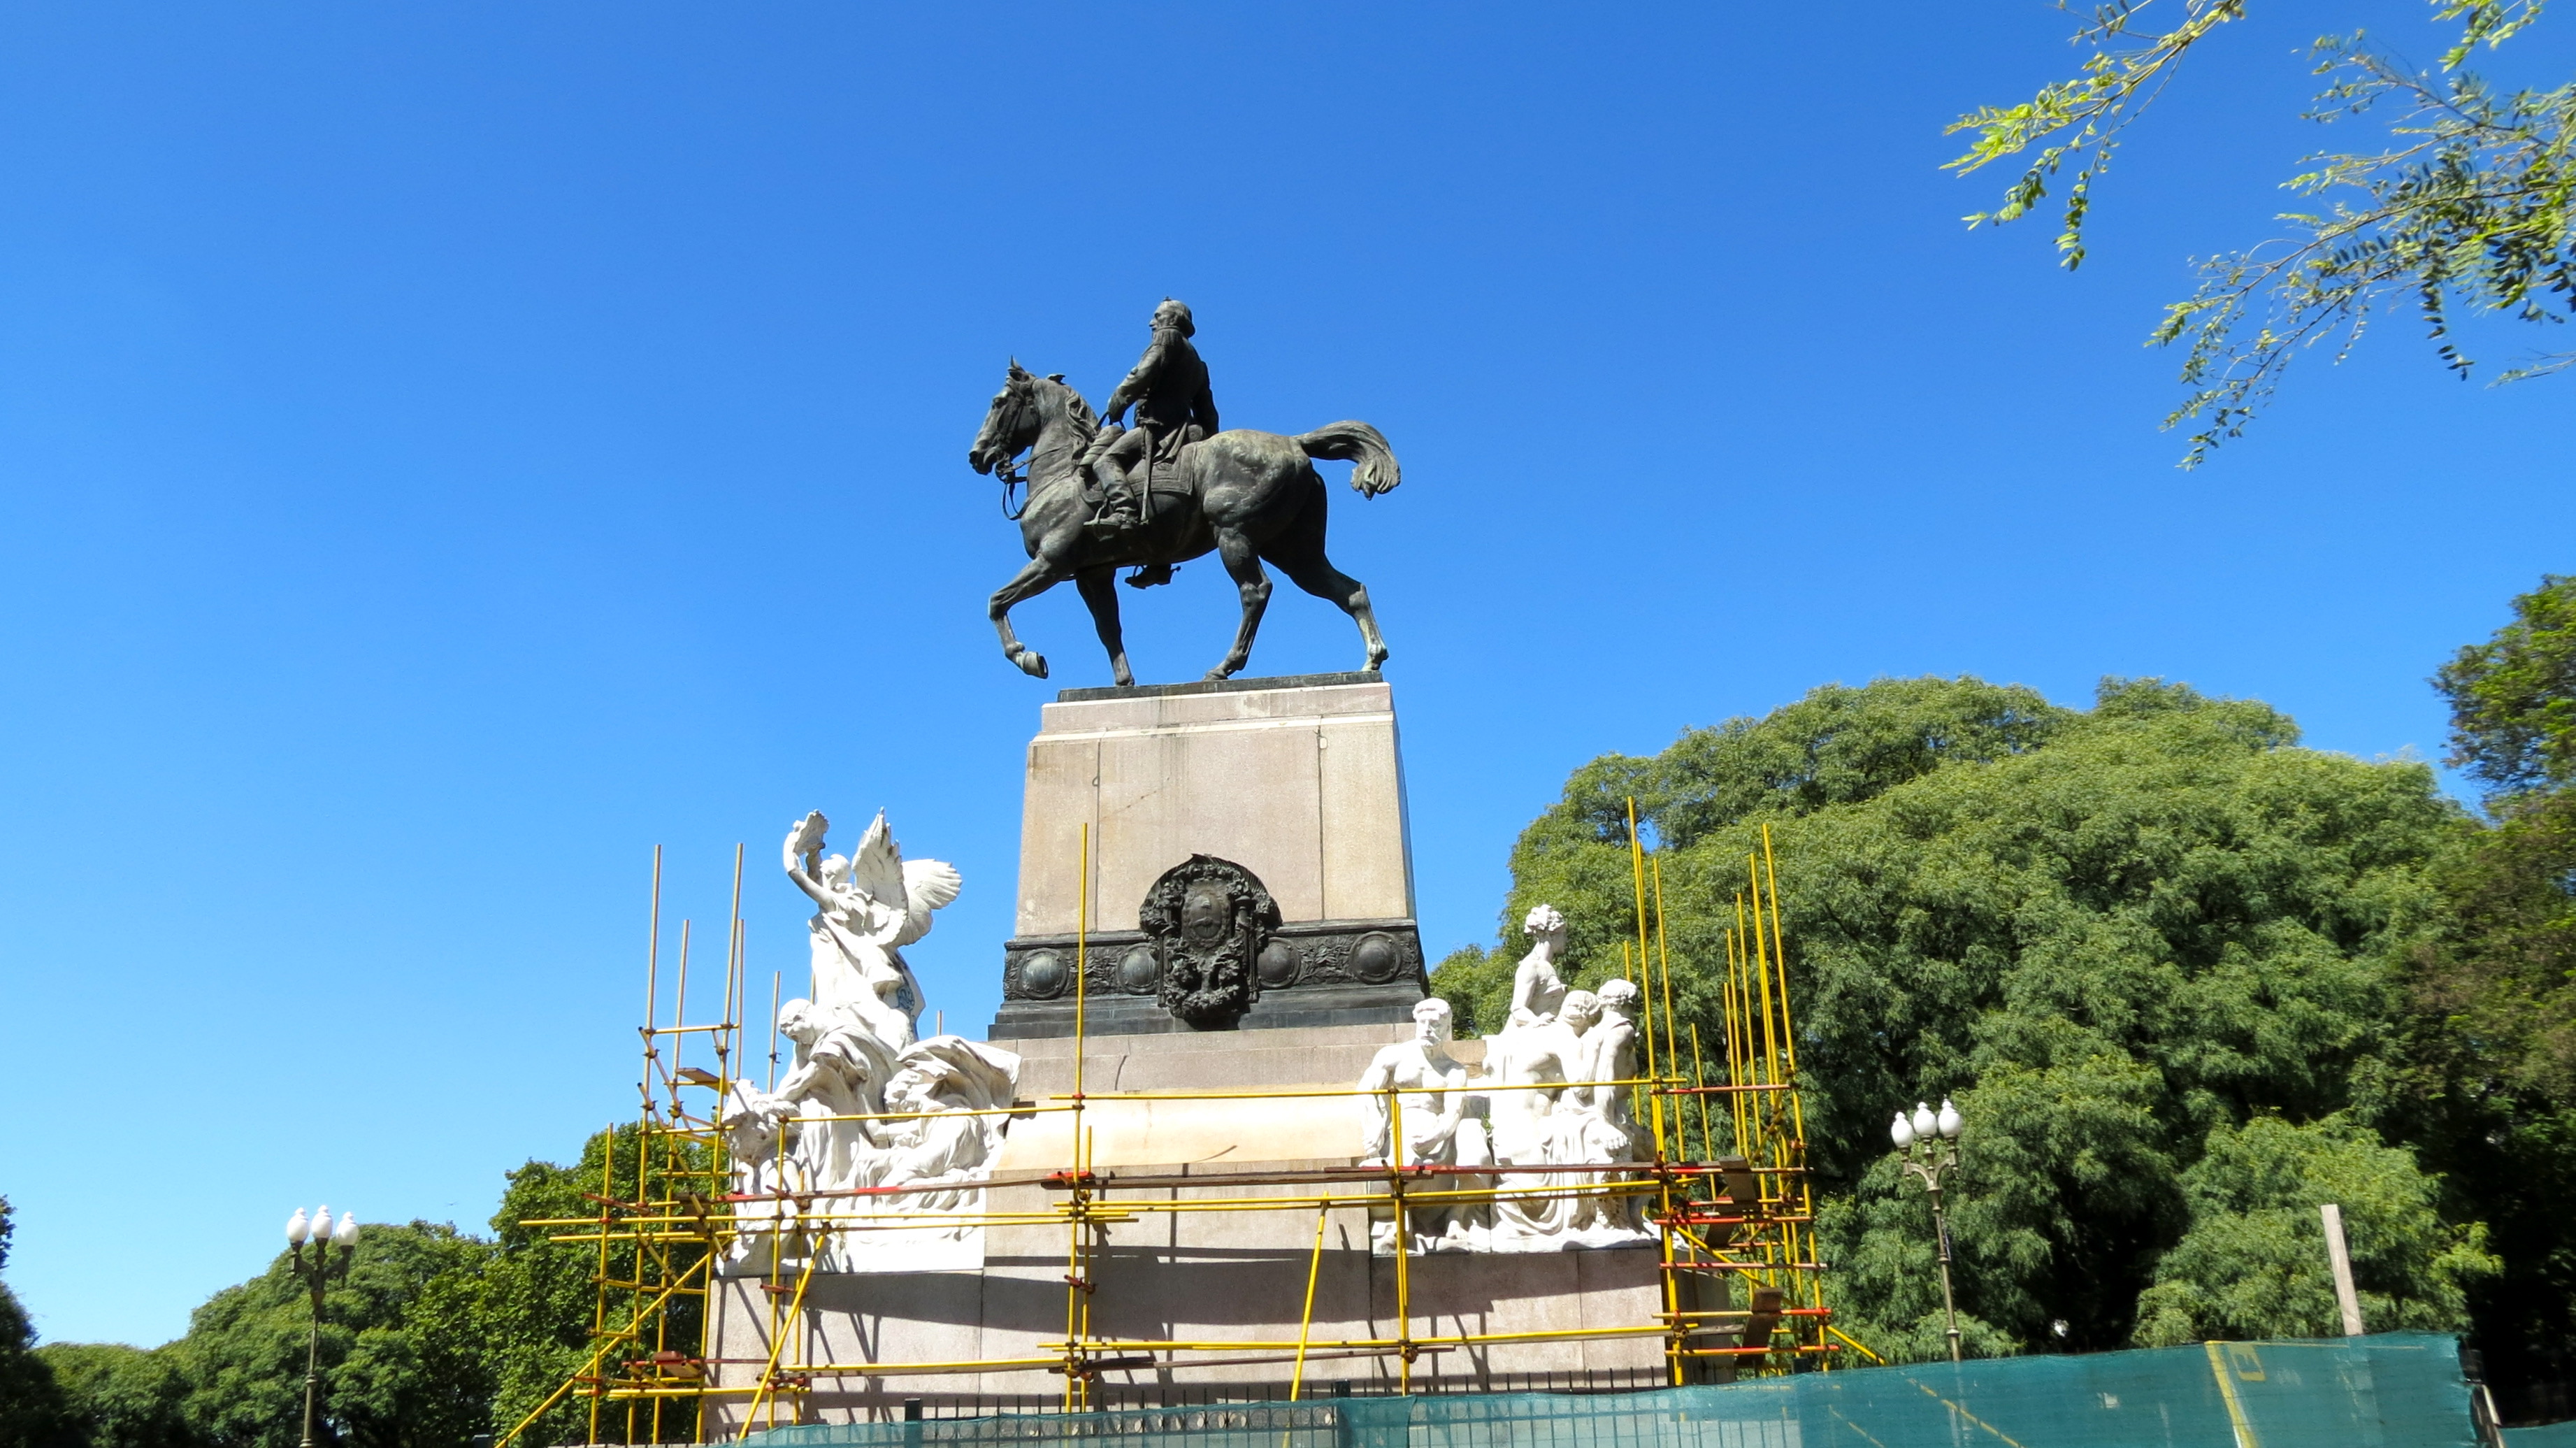 Equestrian statue of Bartolomé Mitre in Buenos Aires Argentina